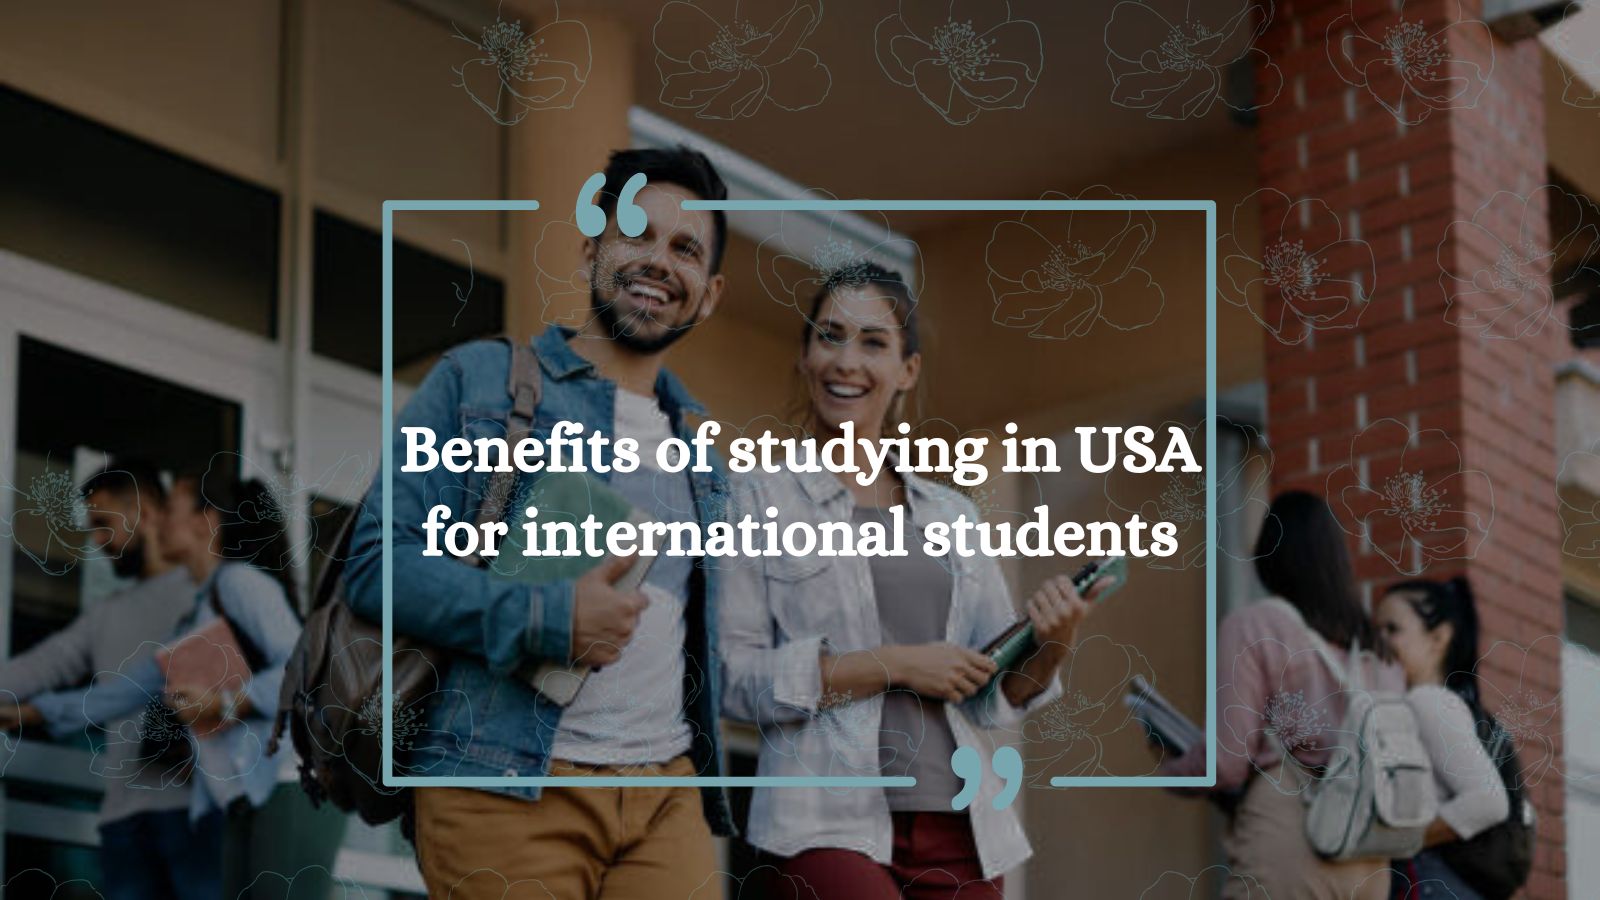 Benefits of studying in USA for international students